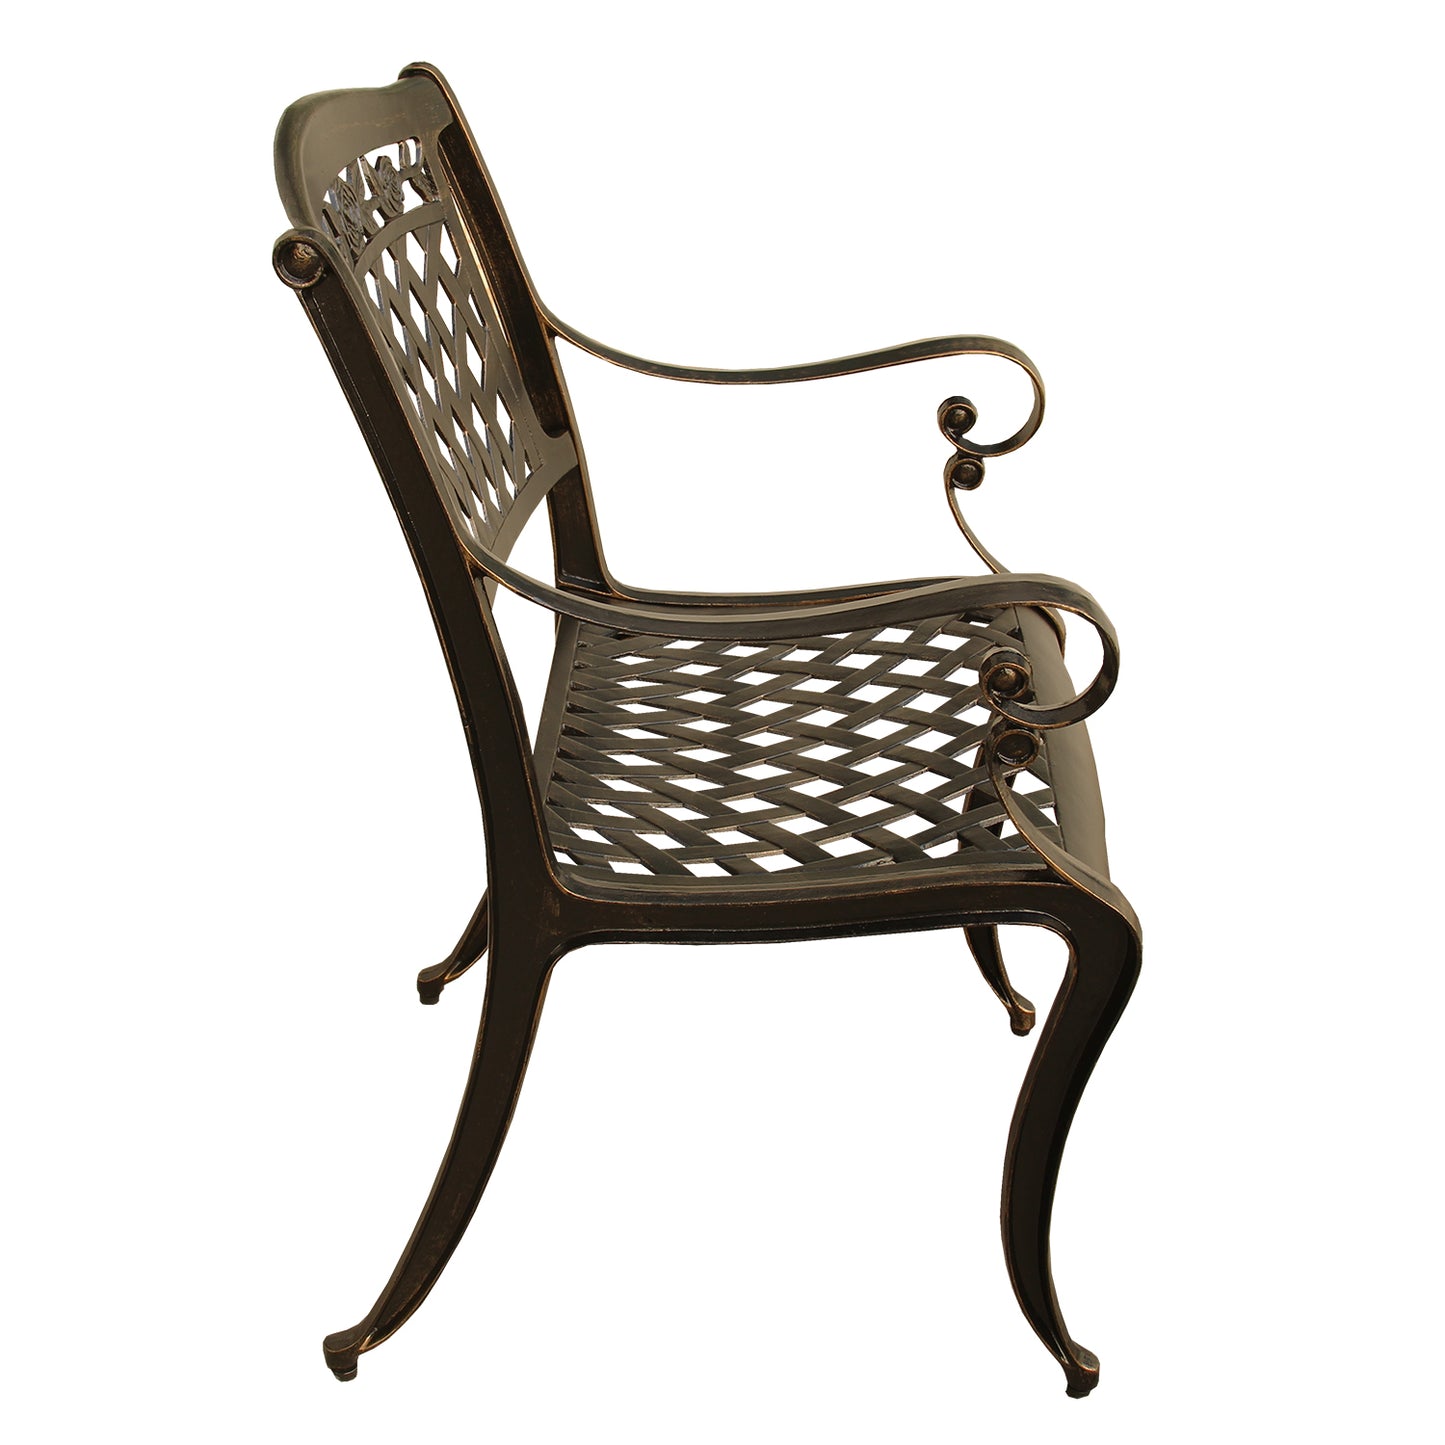 Ornate Traditional Outdoor Cast Aluminum Rose Patio Dining Chair